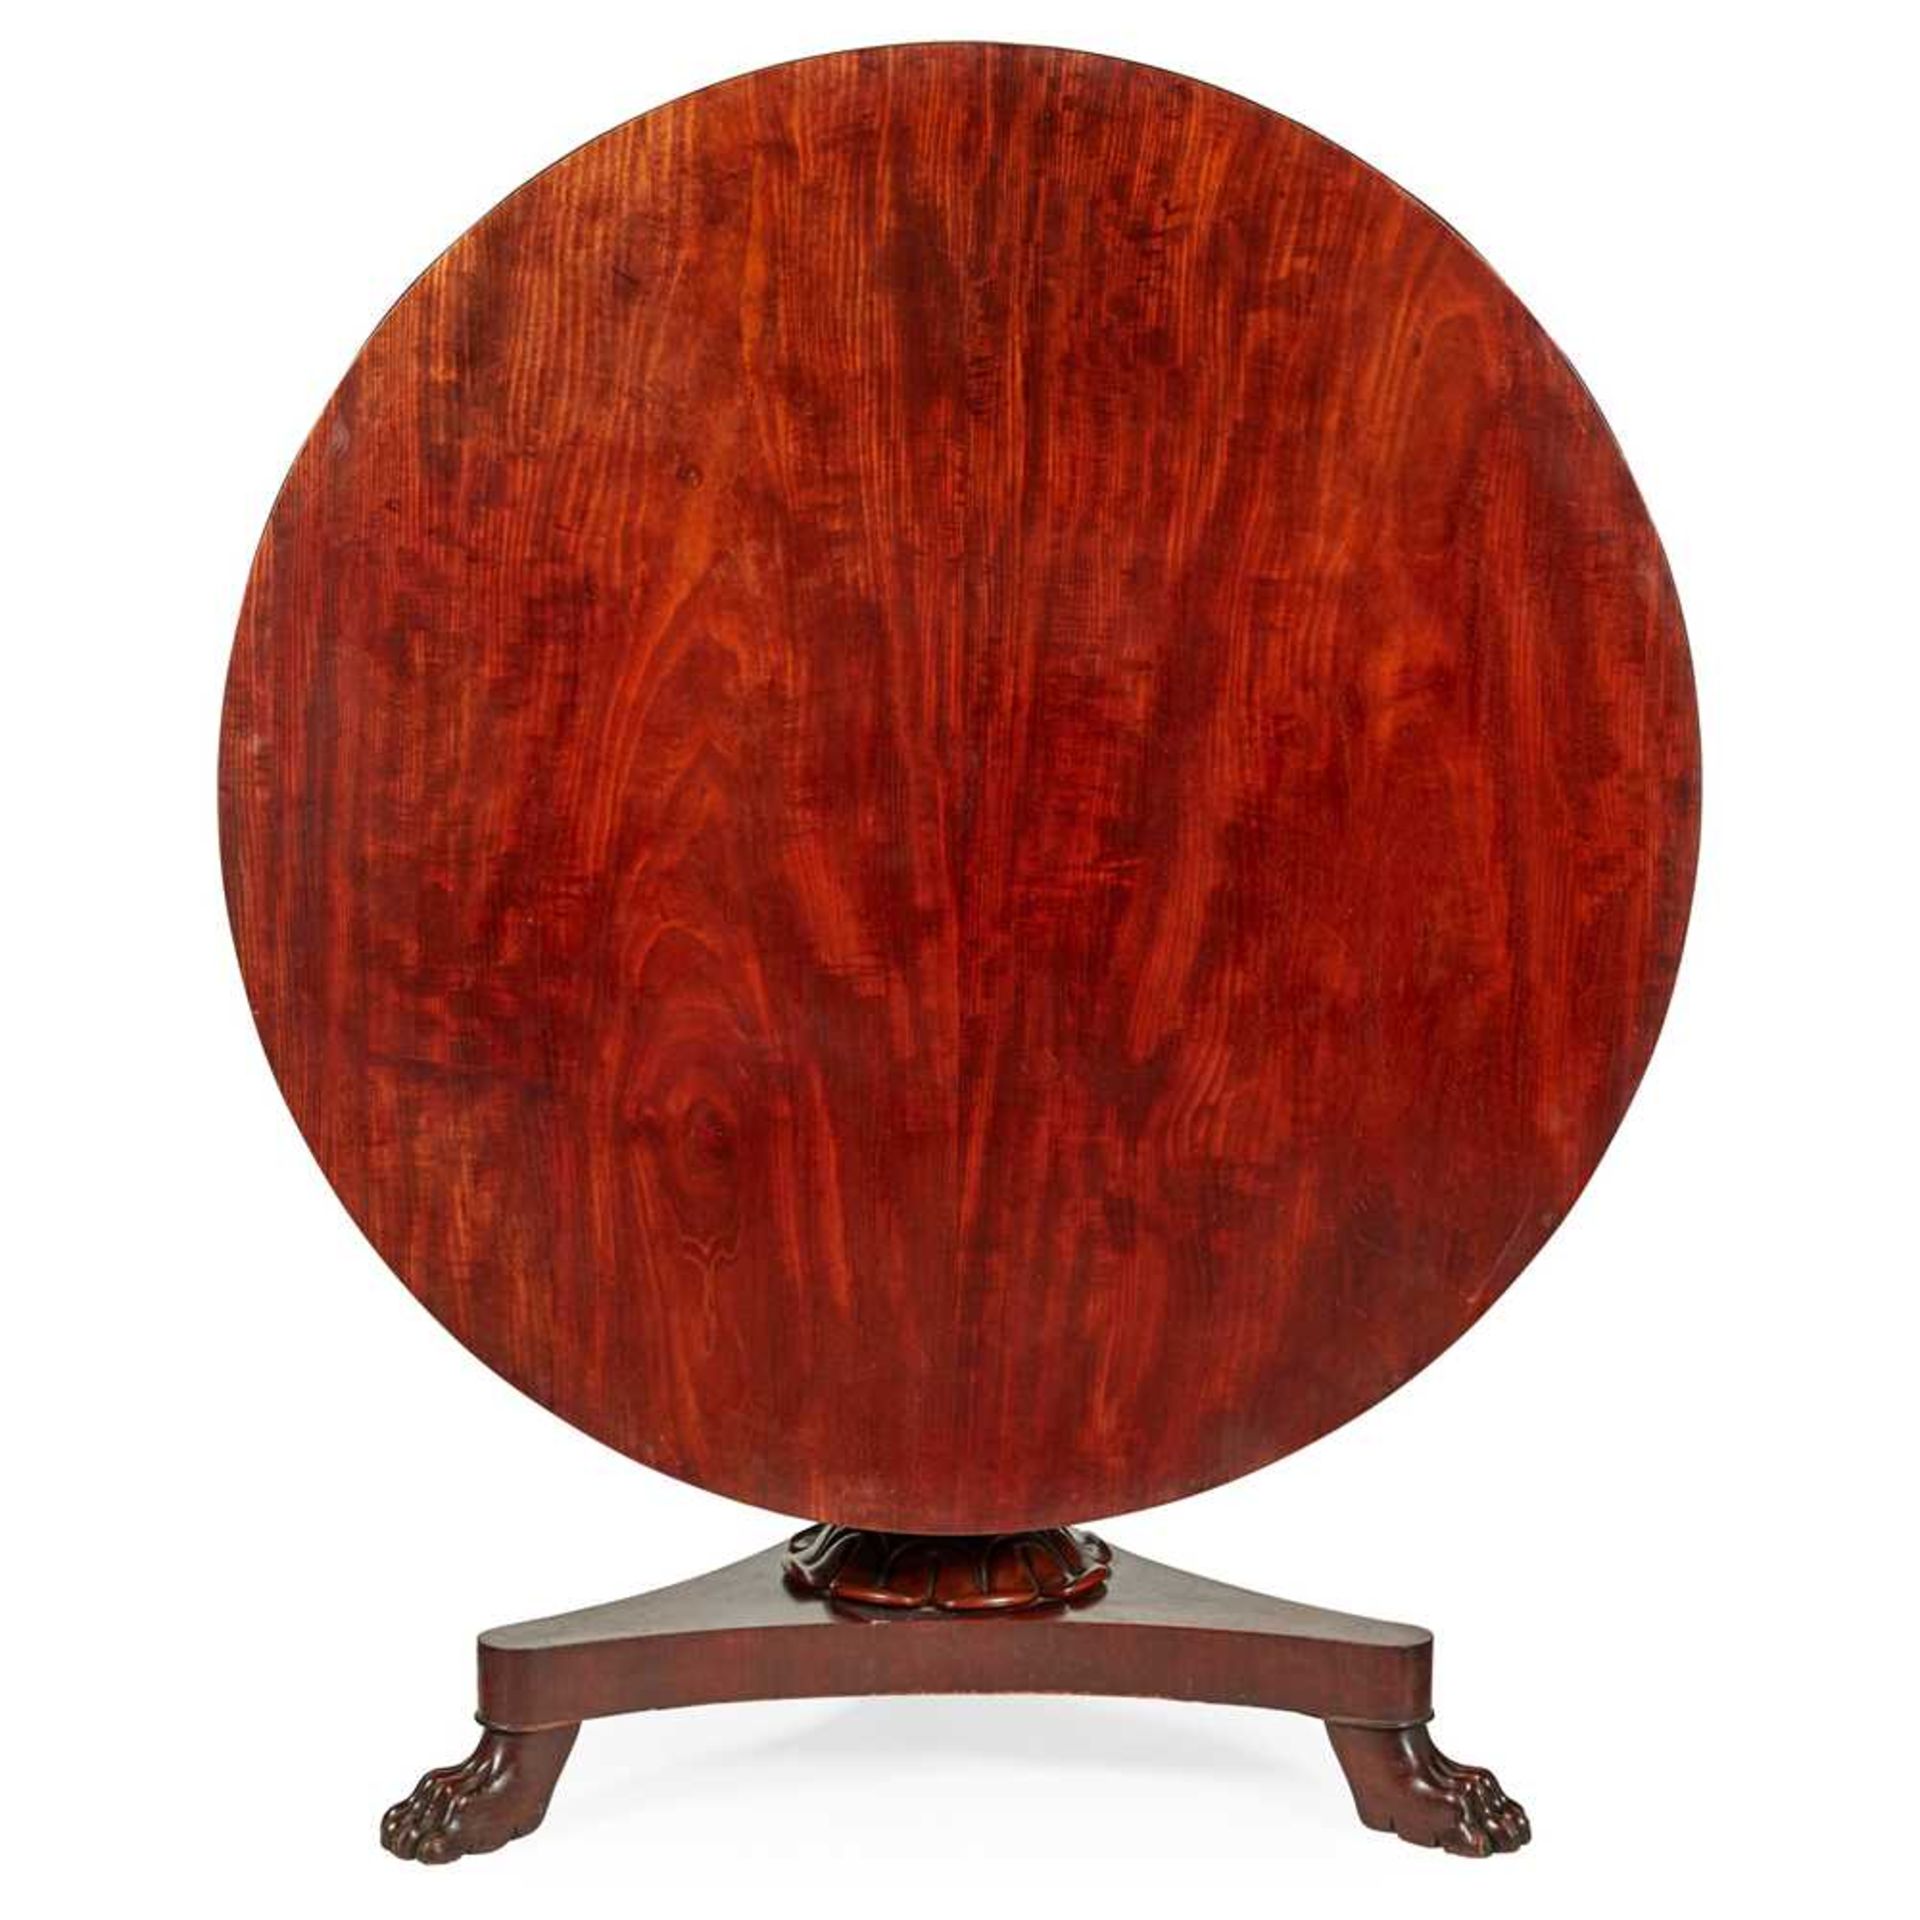 REGENCY MAHOGANY CENTRE TABLE, BY NORMAN & SON EARLY 19TH CENTURY - Image 2 of 2